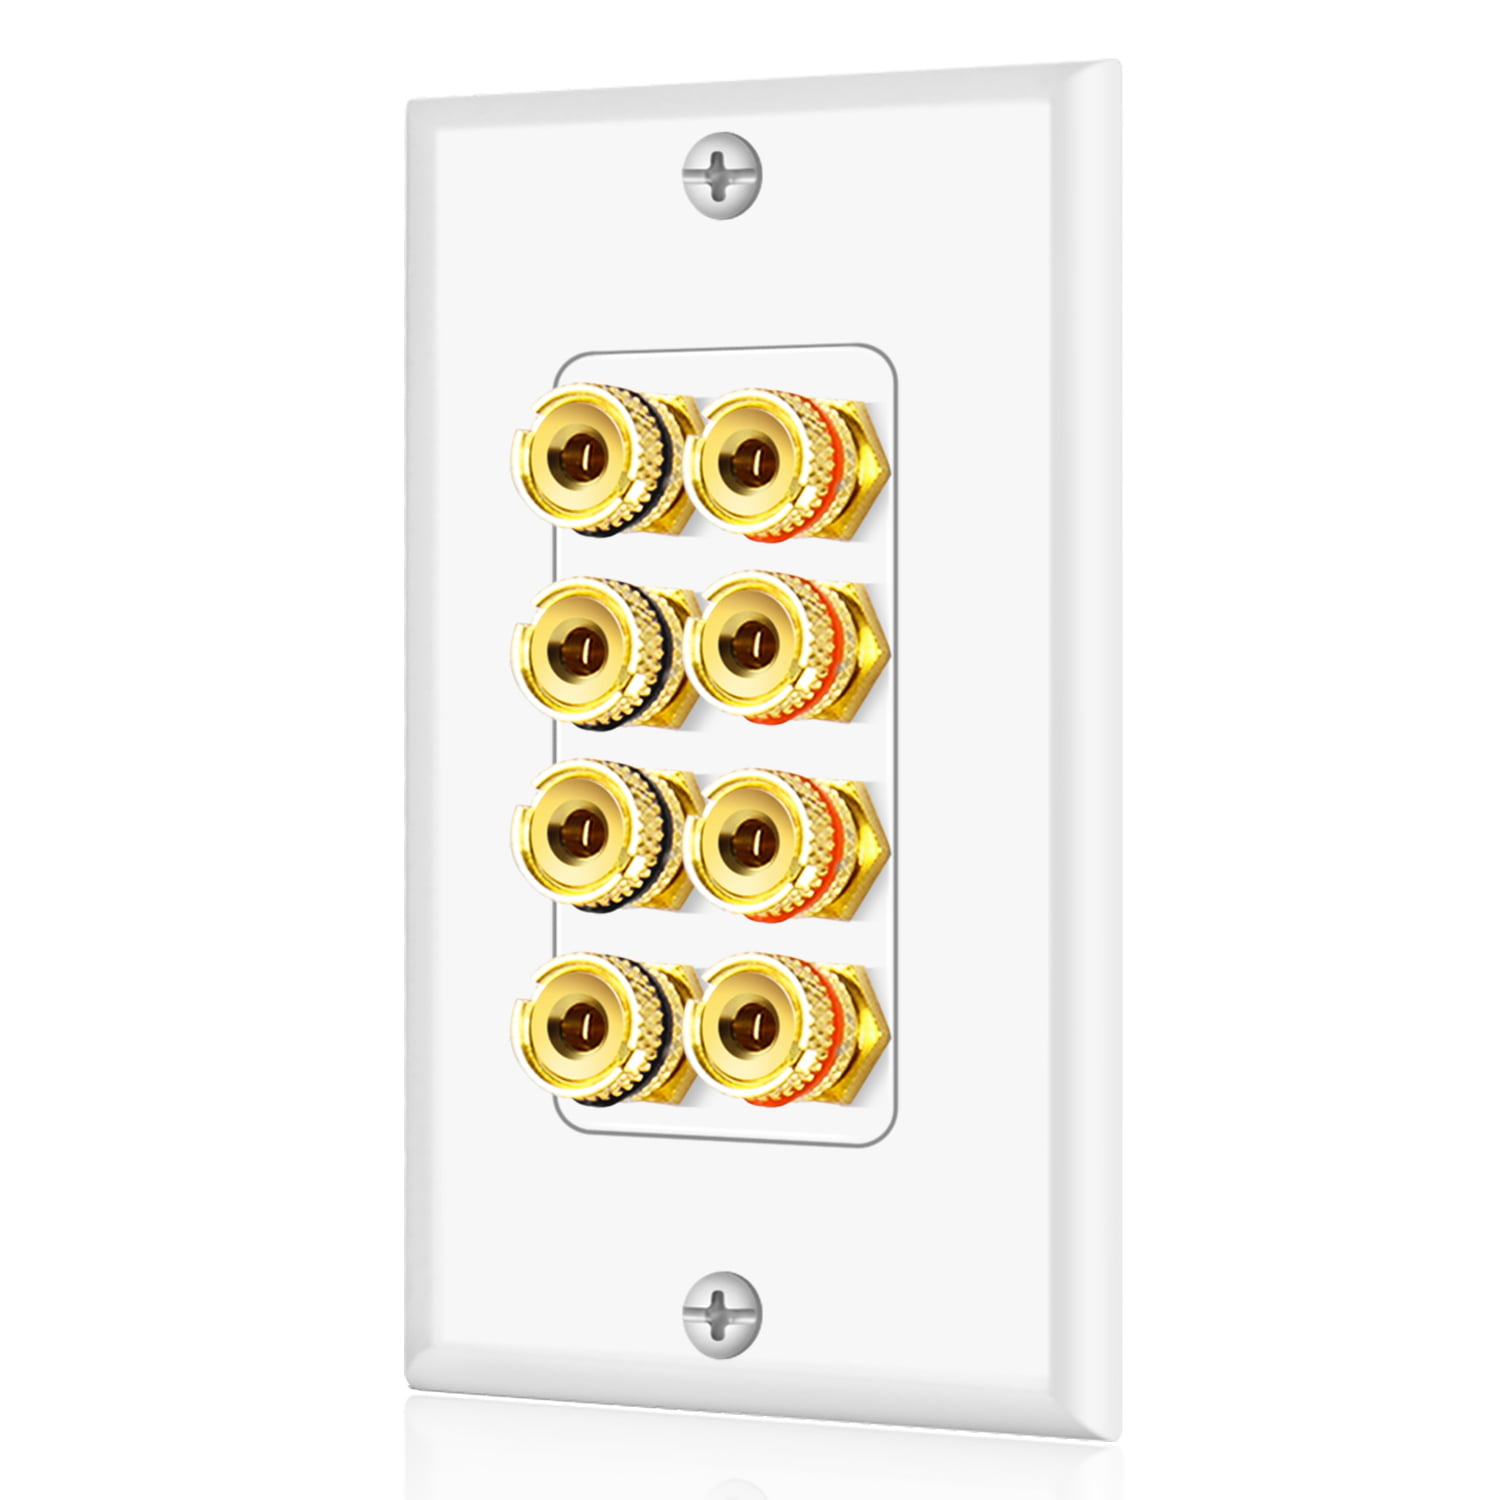 Subwoofer wall plate